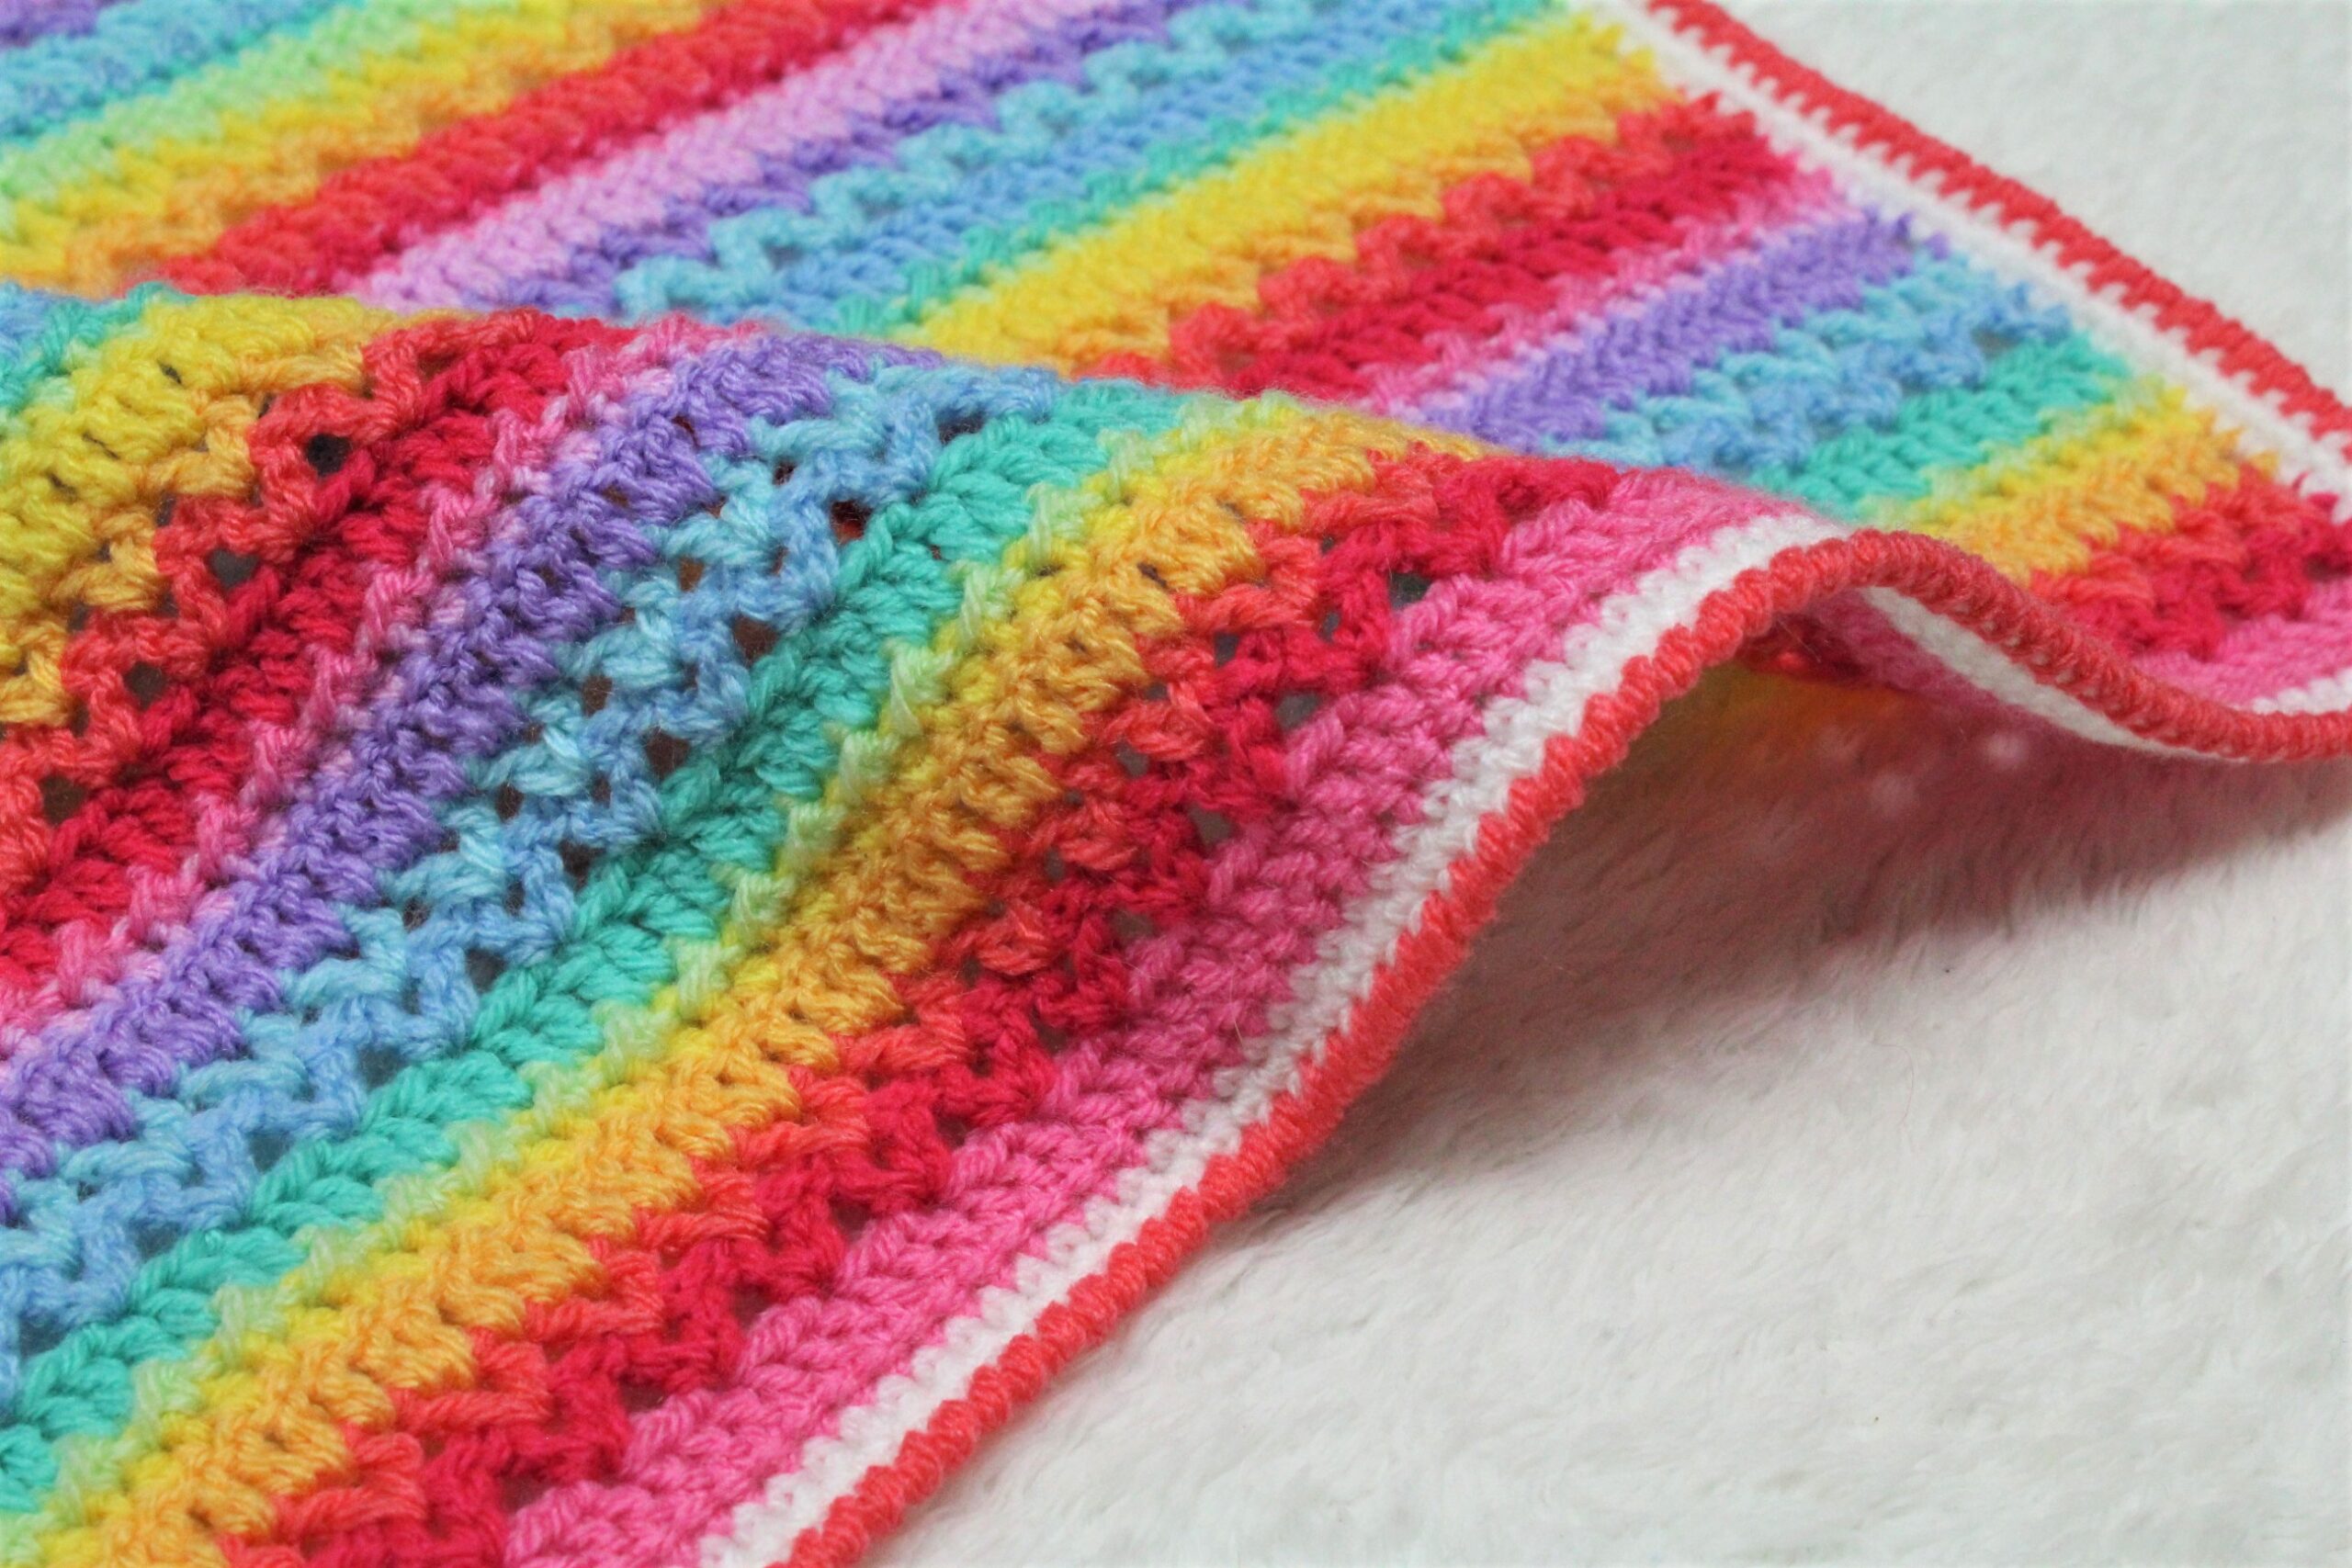 Easy Crochet Stitches for Baby Blankets You'll Love! - Annie Design Crochet